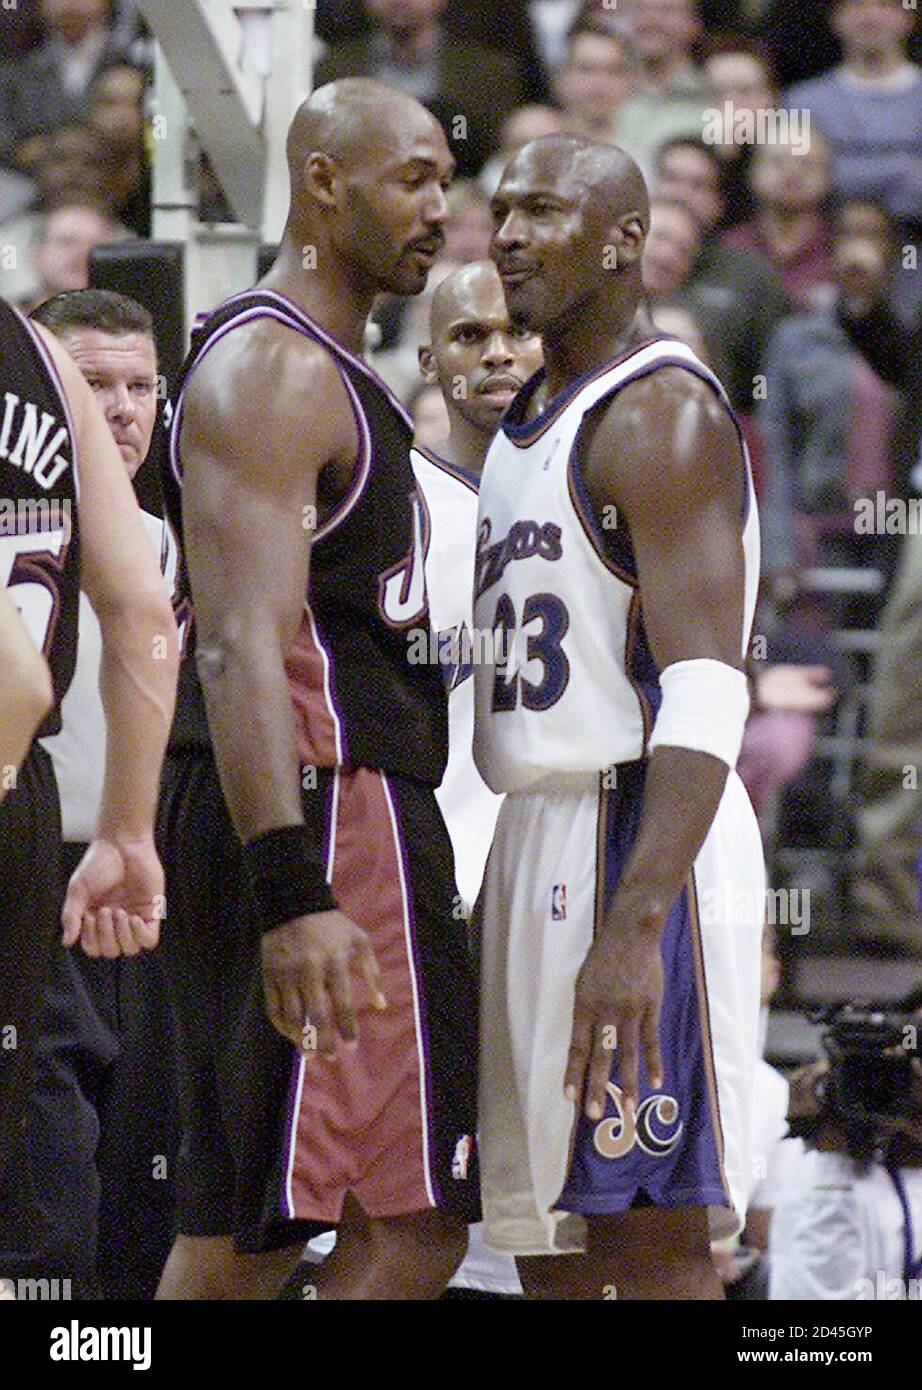 Washington Wizards' Michael Jordan (R) has words with Utah Jazz' Karl Malone  in the fourth quarter at the MCI Center in Washington November 14, 2002.  Both players received technicals by the referee.